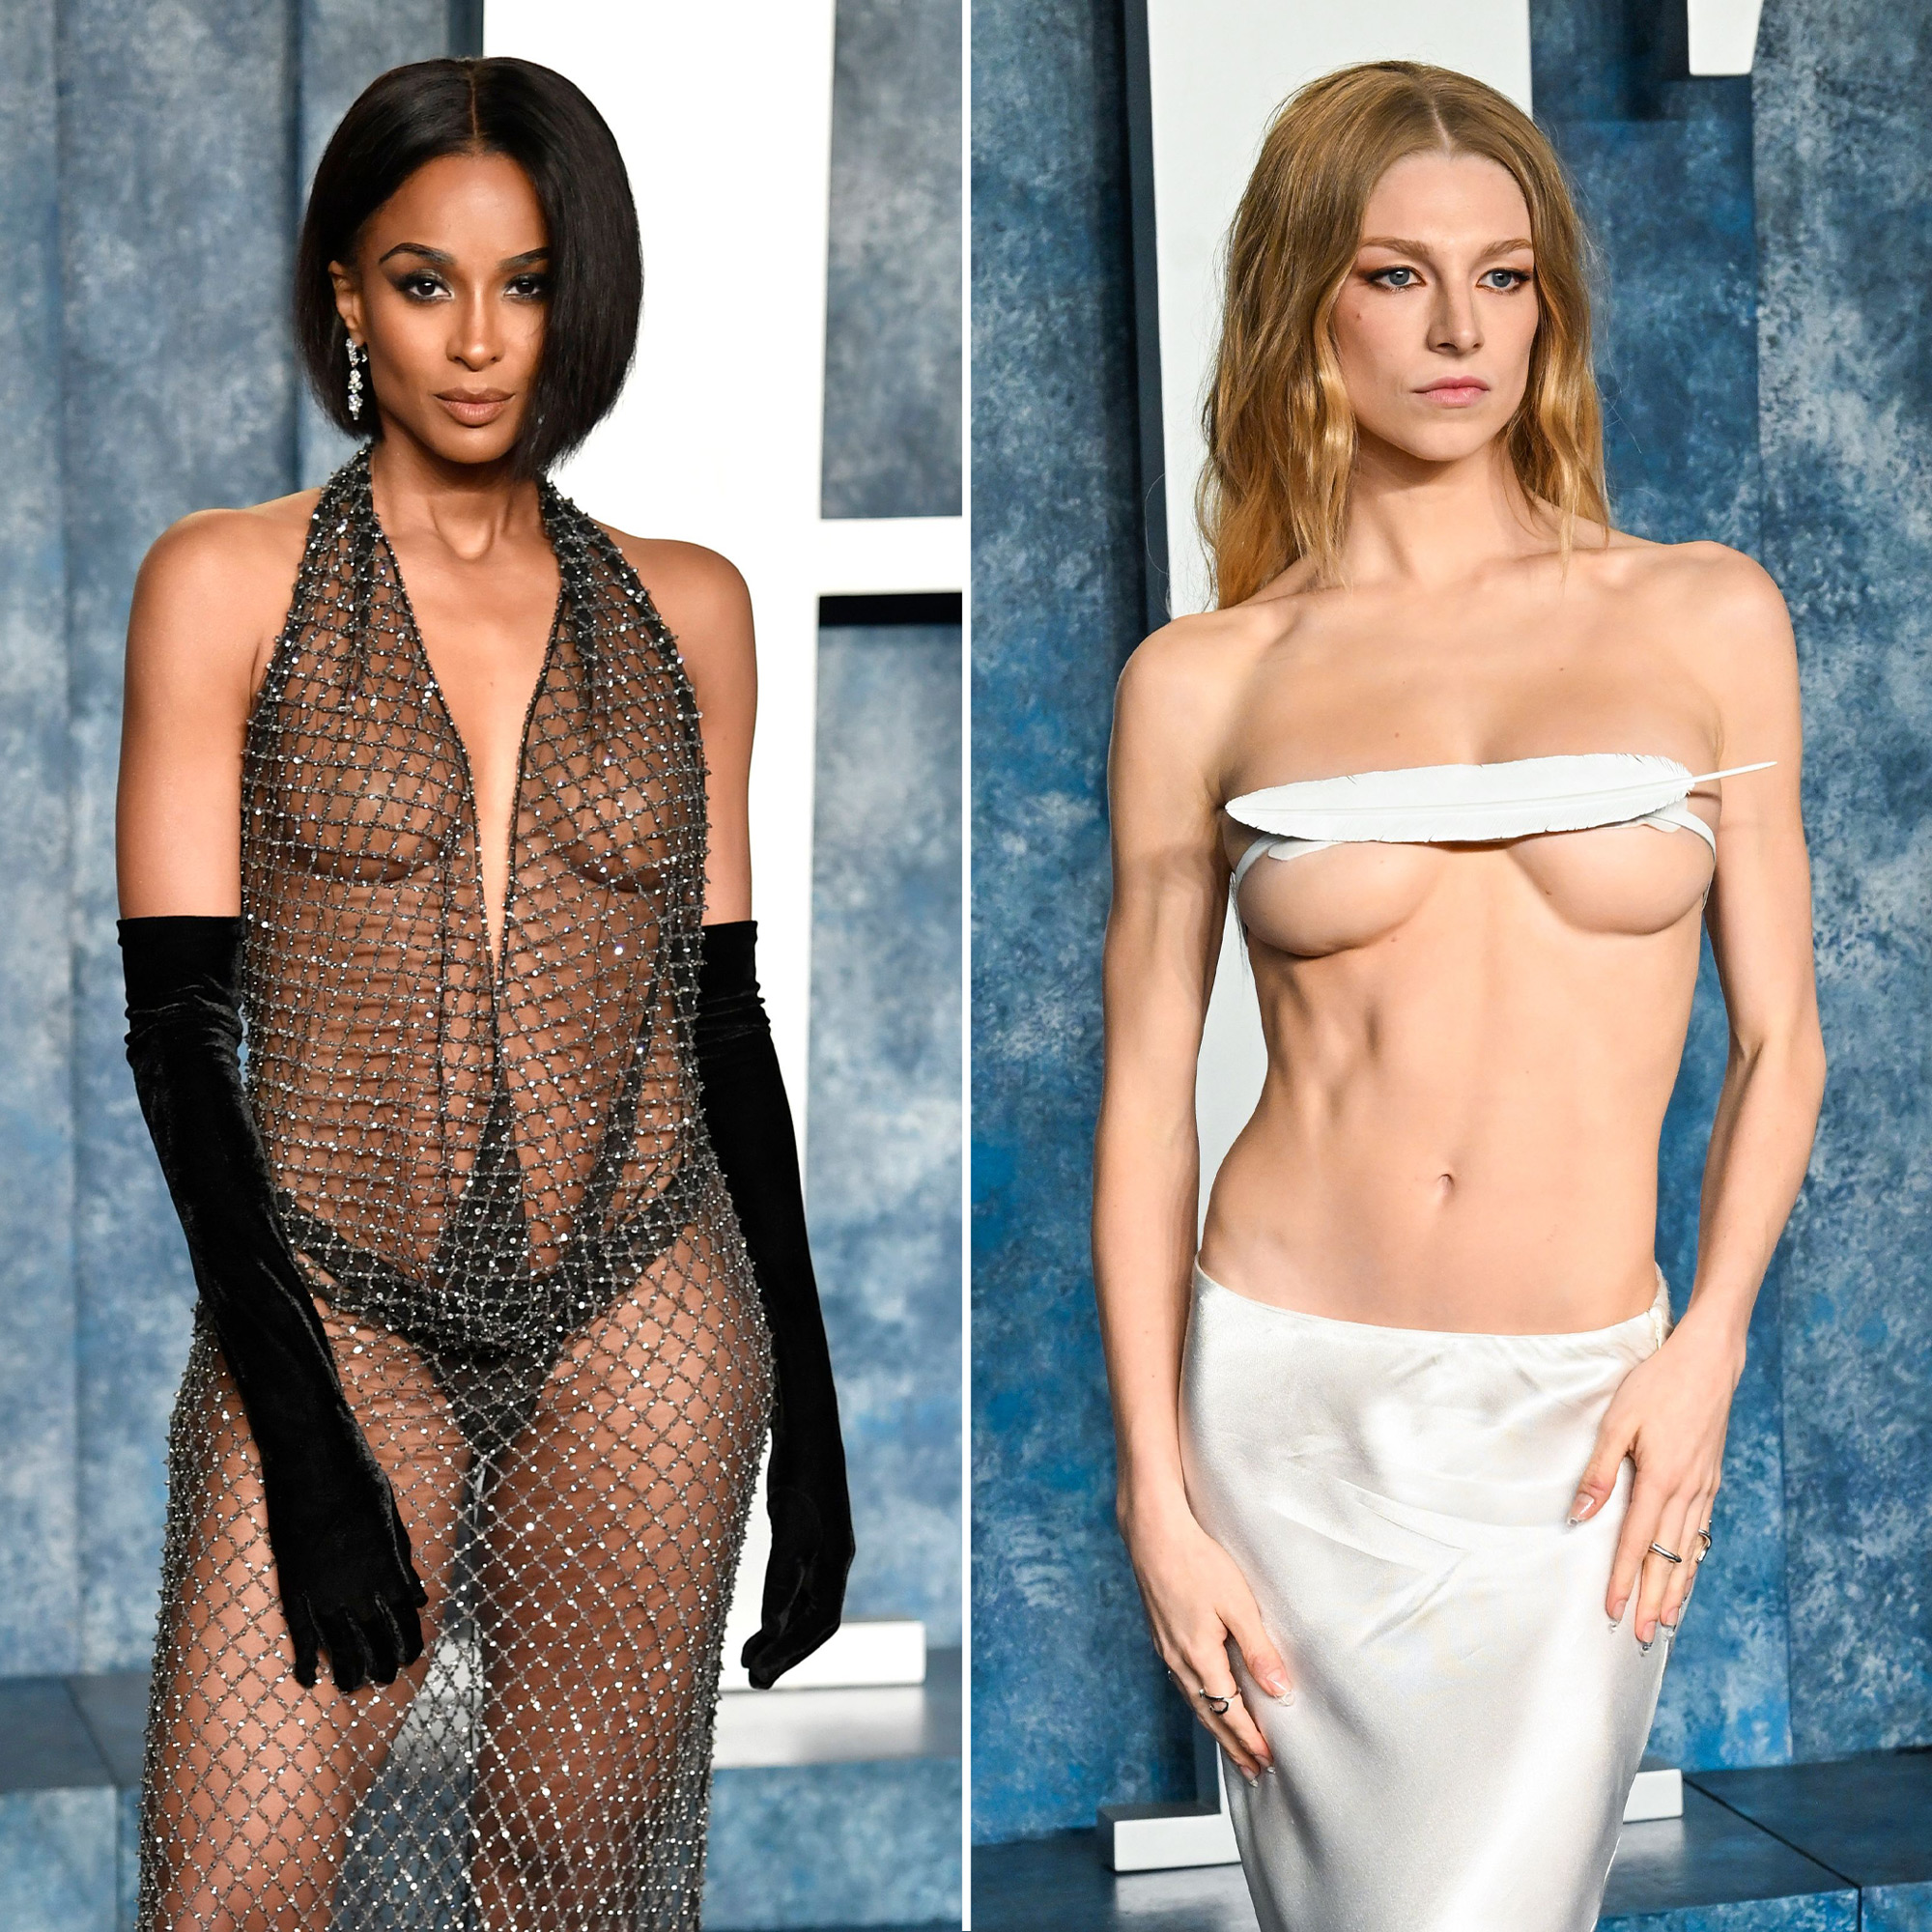 Black Reality Tv Stars Nude - Celebs Boldest Nearly Naked Red Carpet Looks of All Time